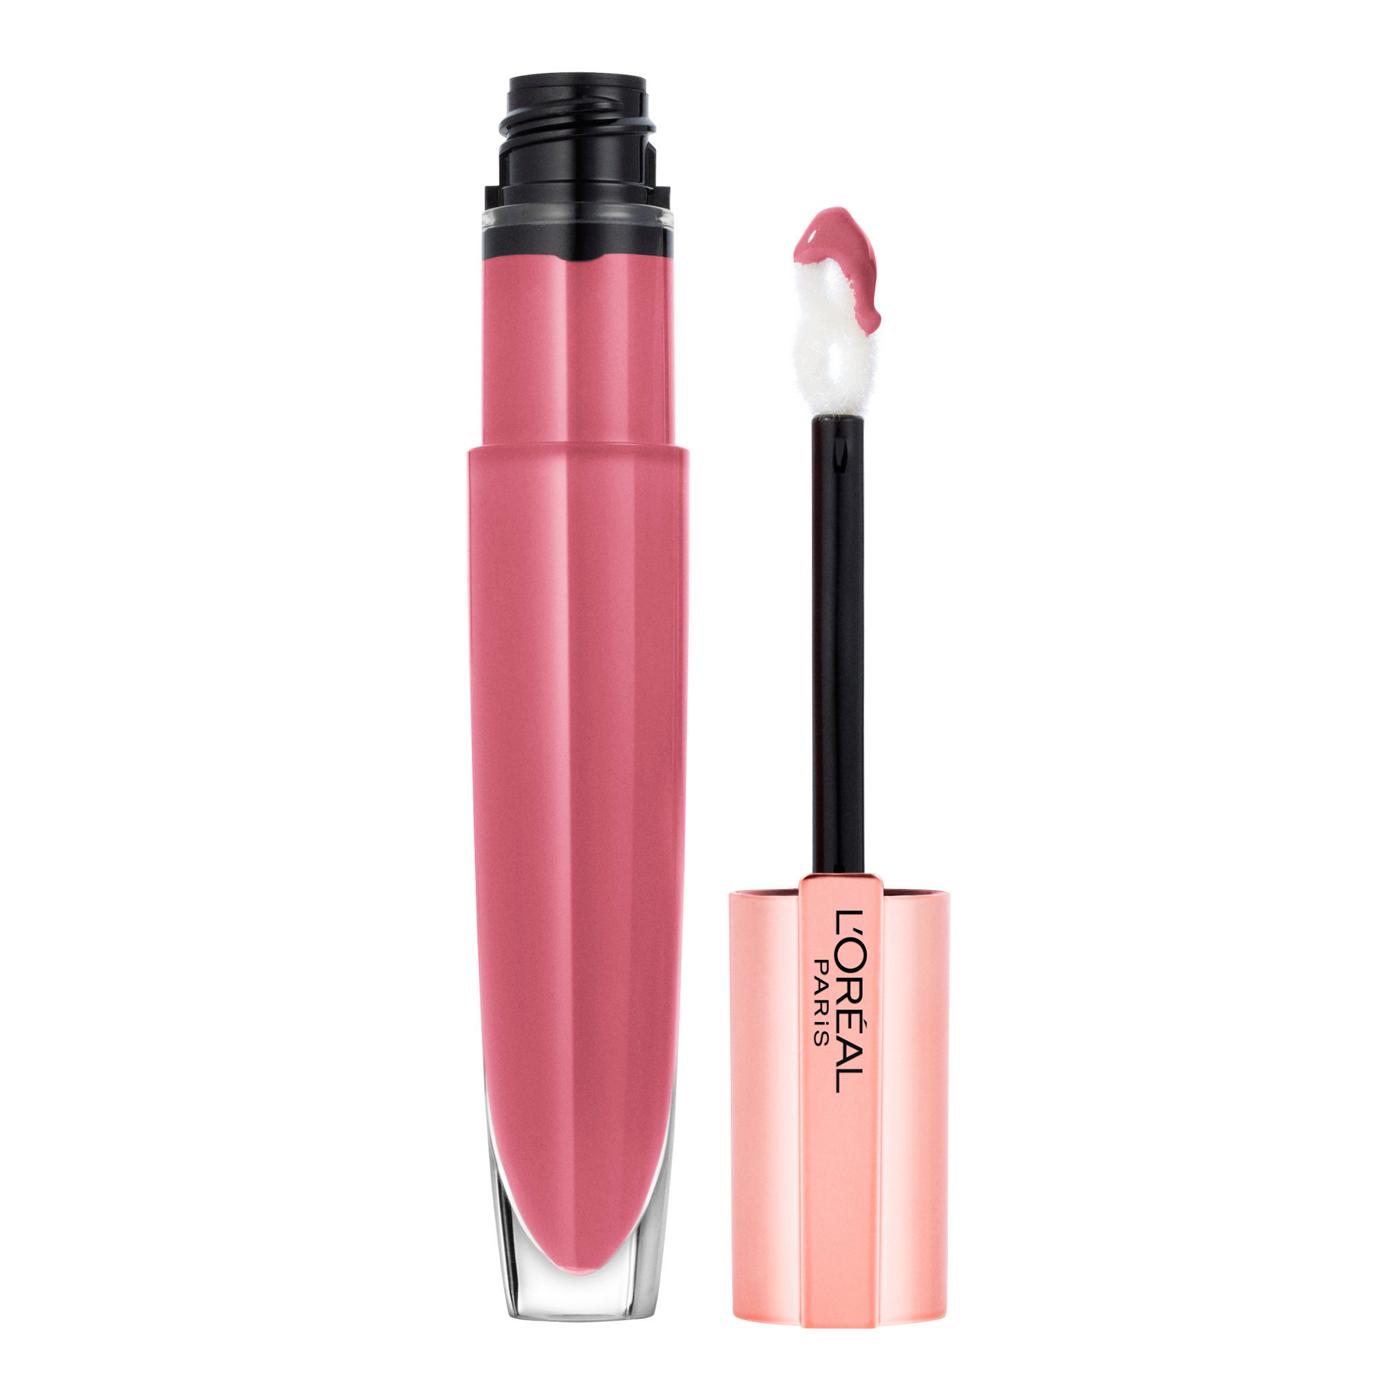 L'Oréal Paris Glow Paradise  Lip Balm-in-Gloss Pomegranate Extract Rosy Utopia; image 1 of 6